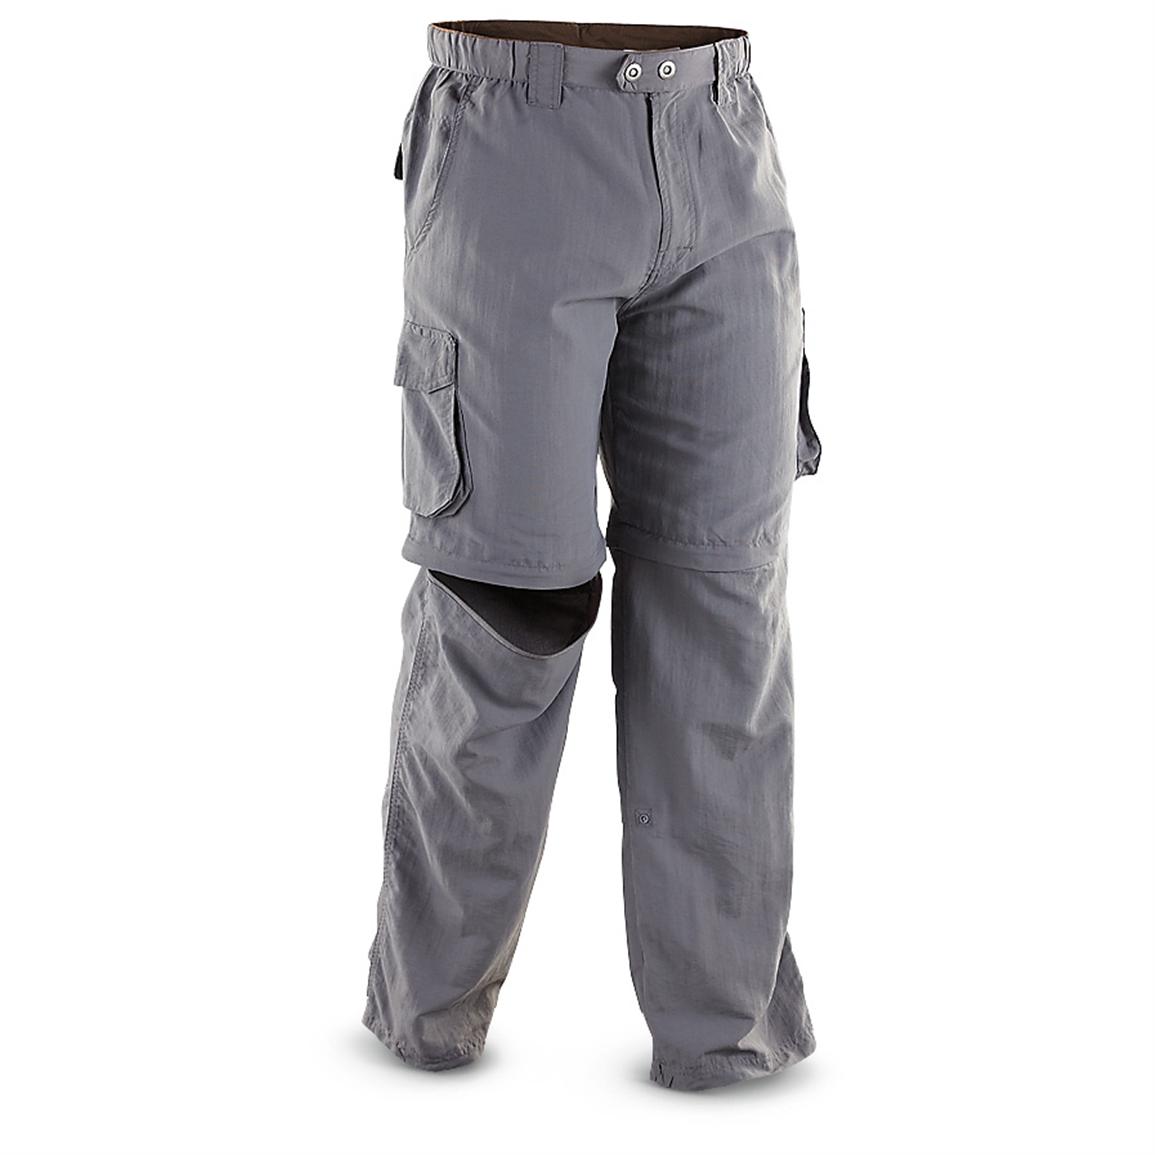 Natural Gear® Switchback Pants - 216243, Jeans & Pants at Sportsman's Guide